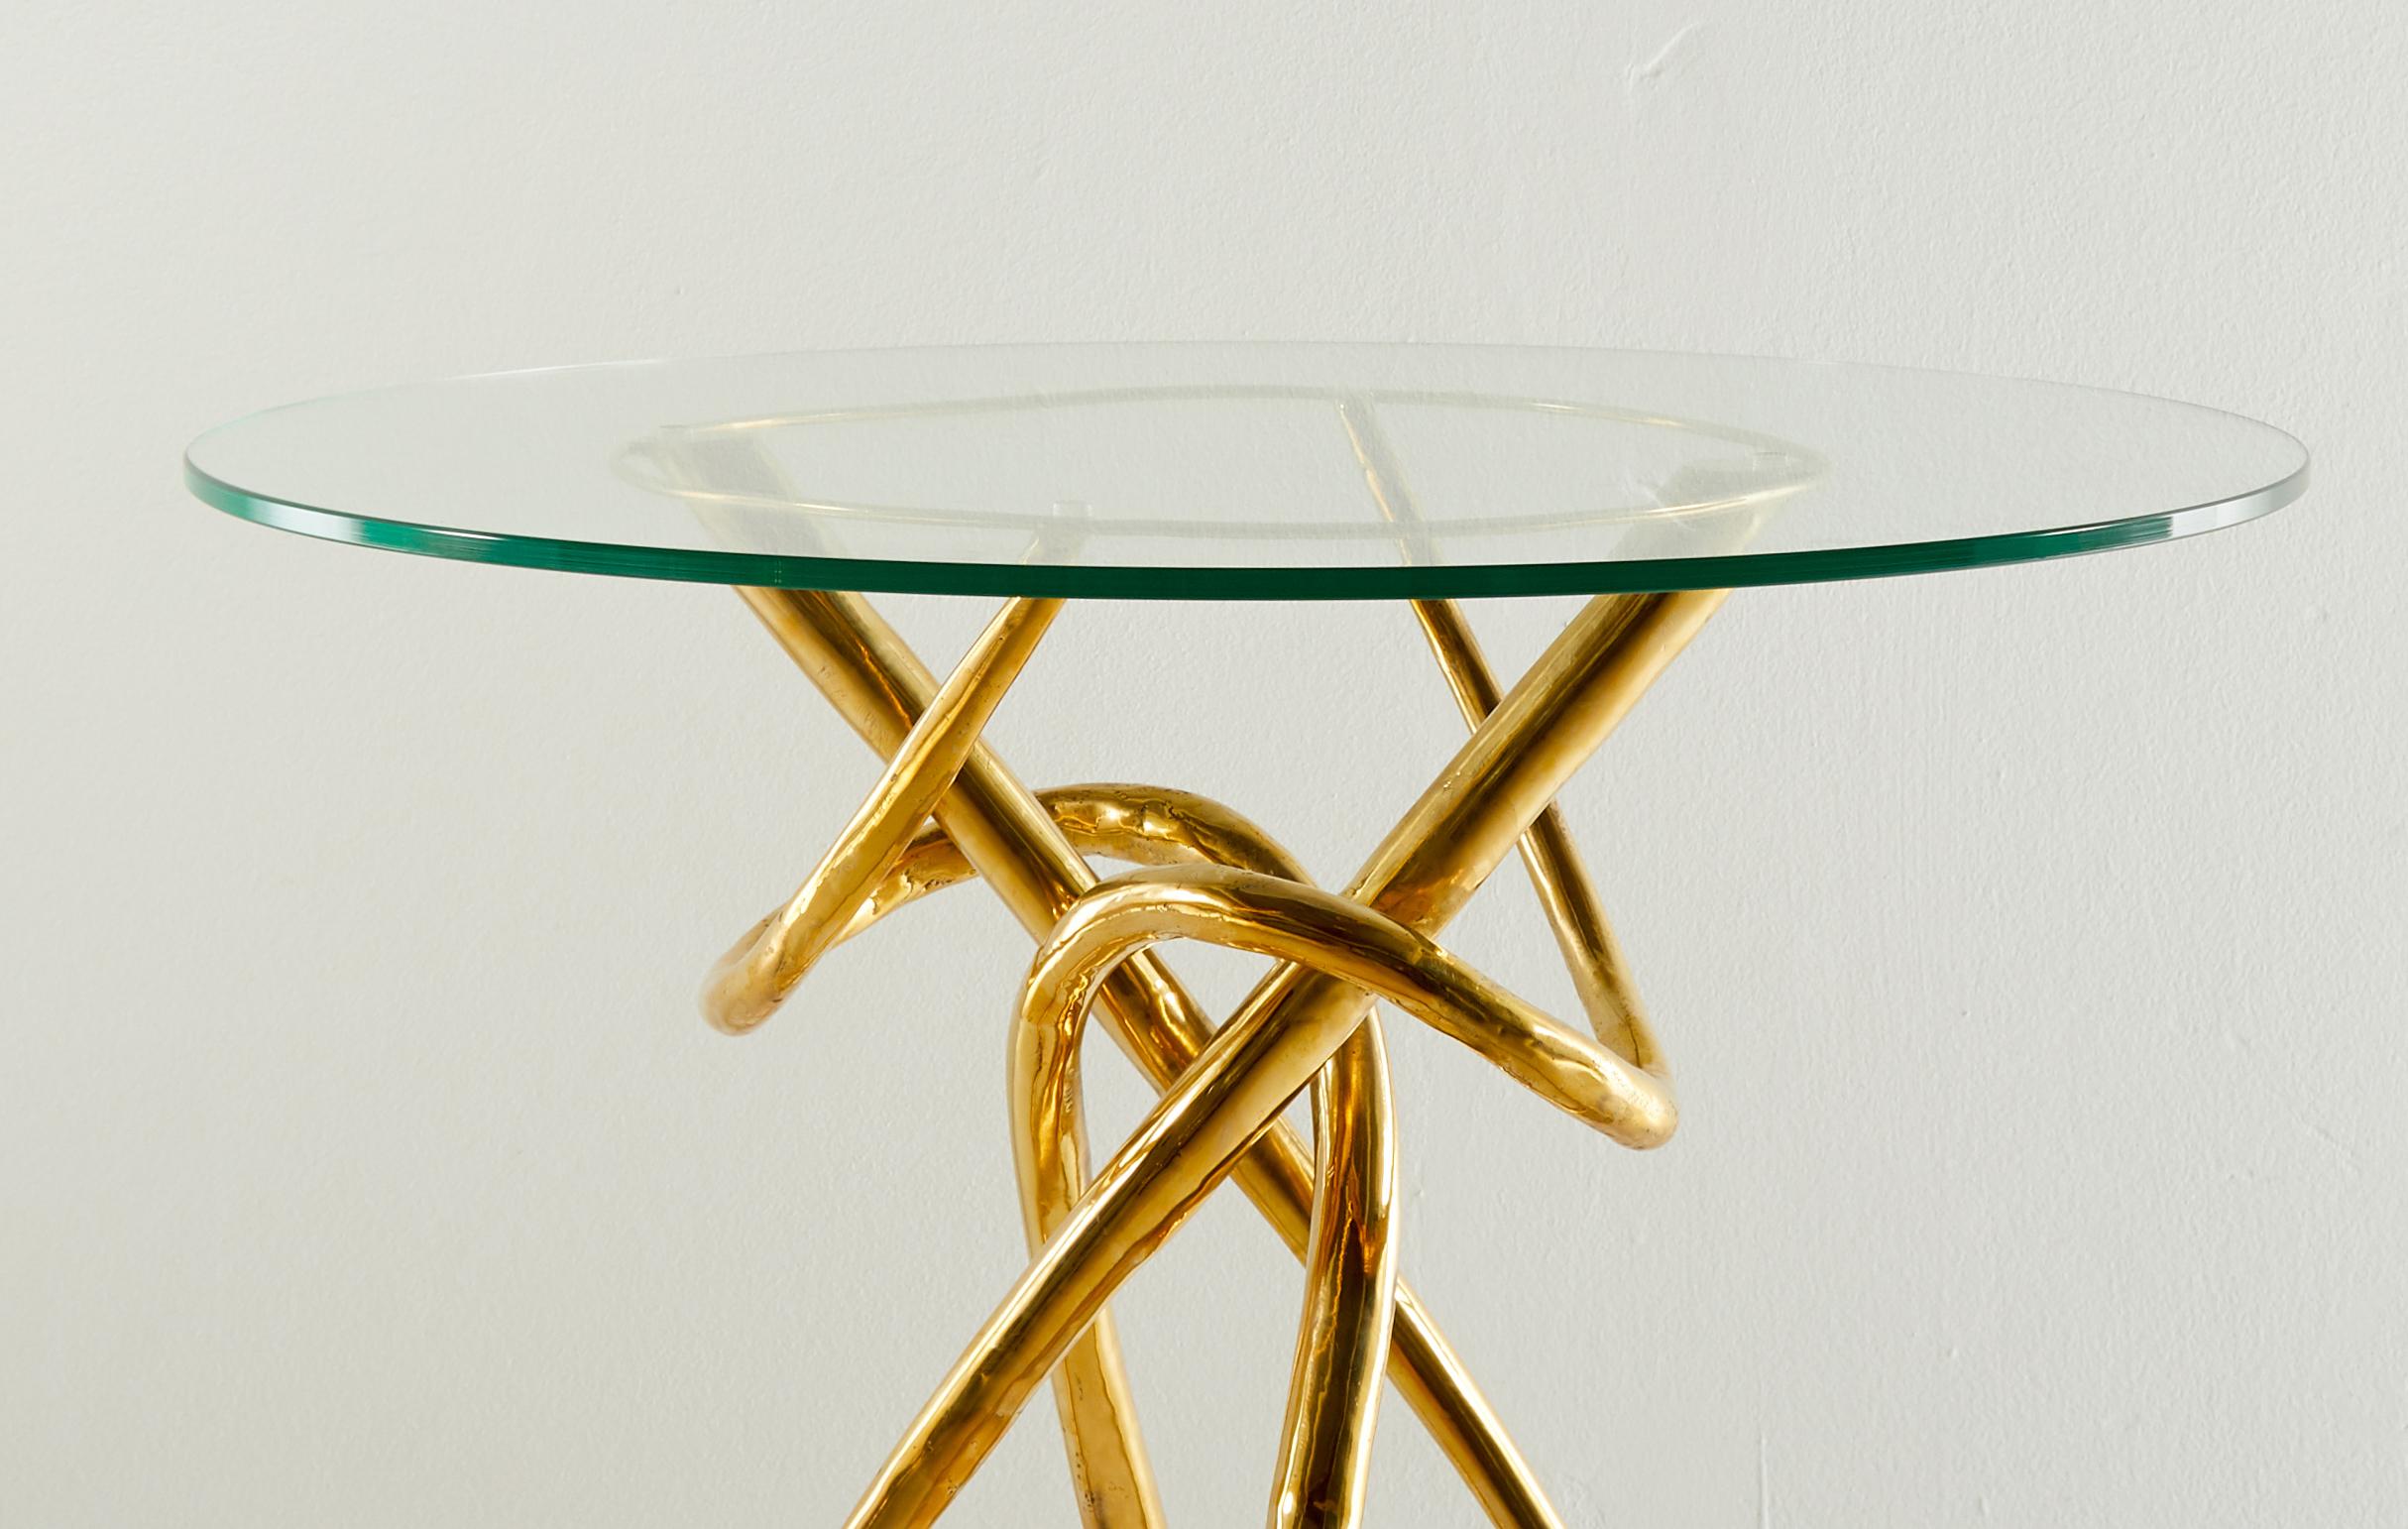 Brass dining table, Gordian Node, Misaya
Dimensions: W 60 x L 60 x H 70 cm
Hand-sculpted brass table.
Sold without the glass top.